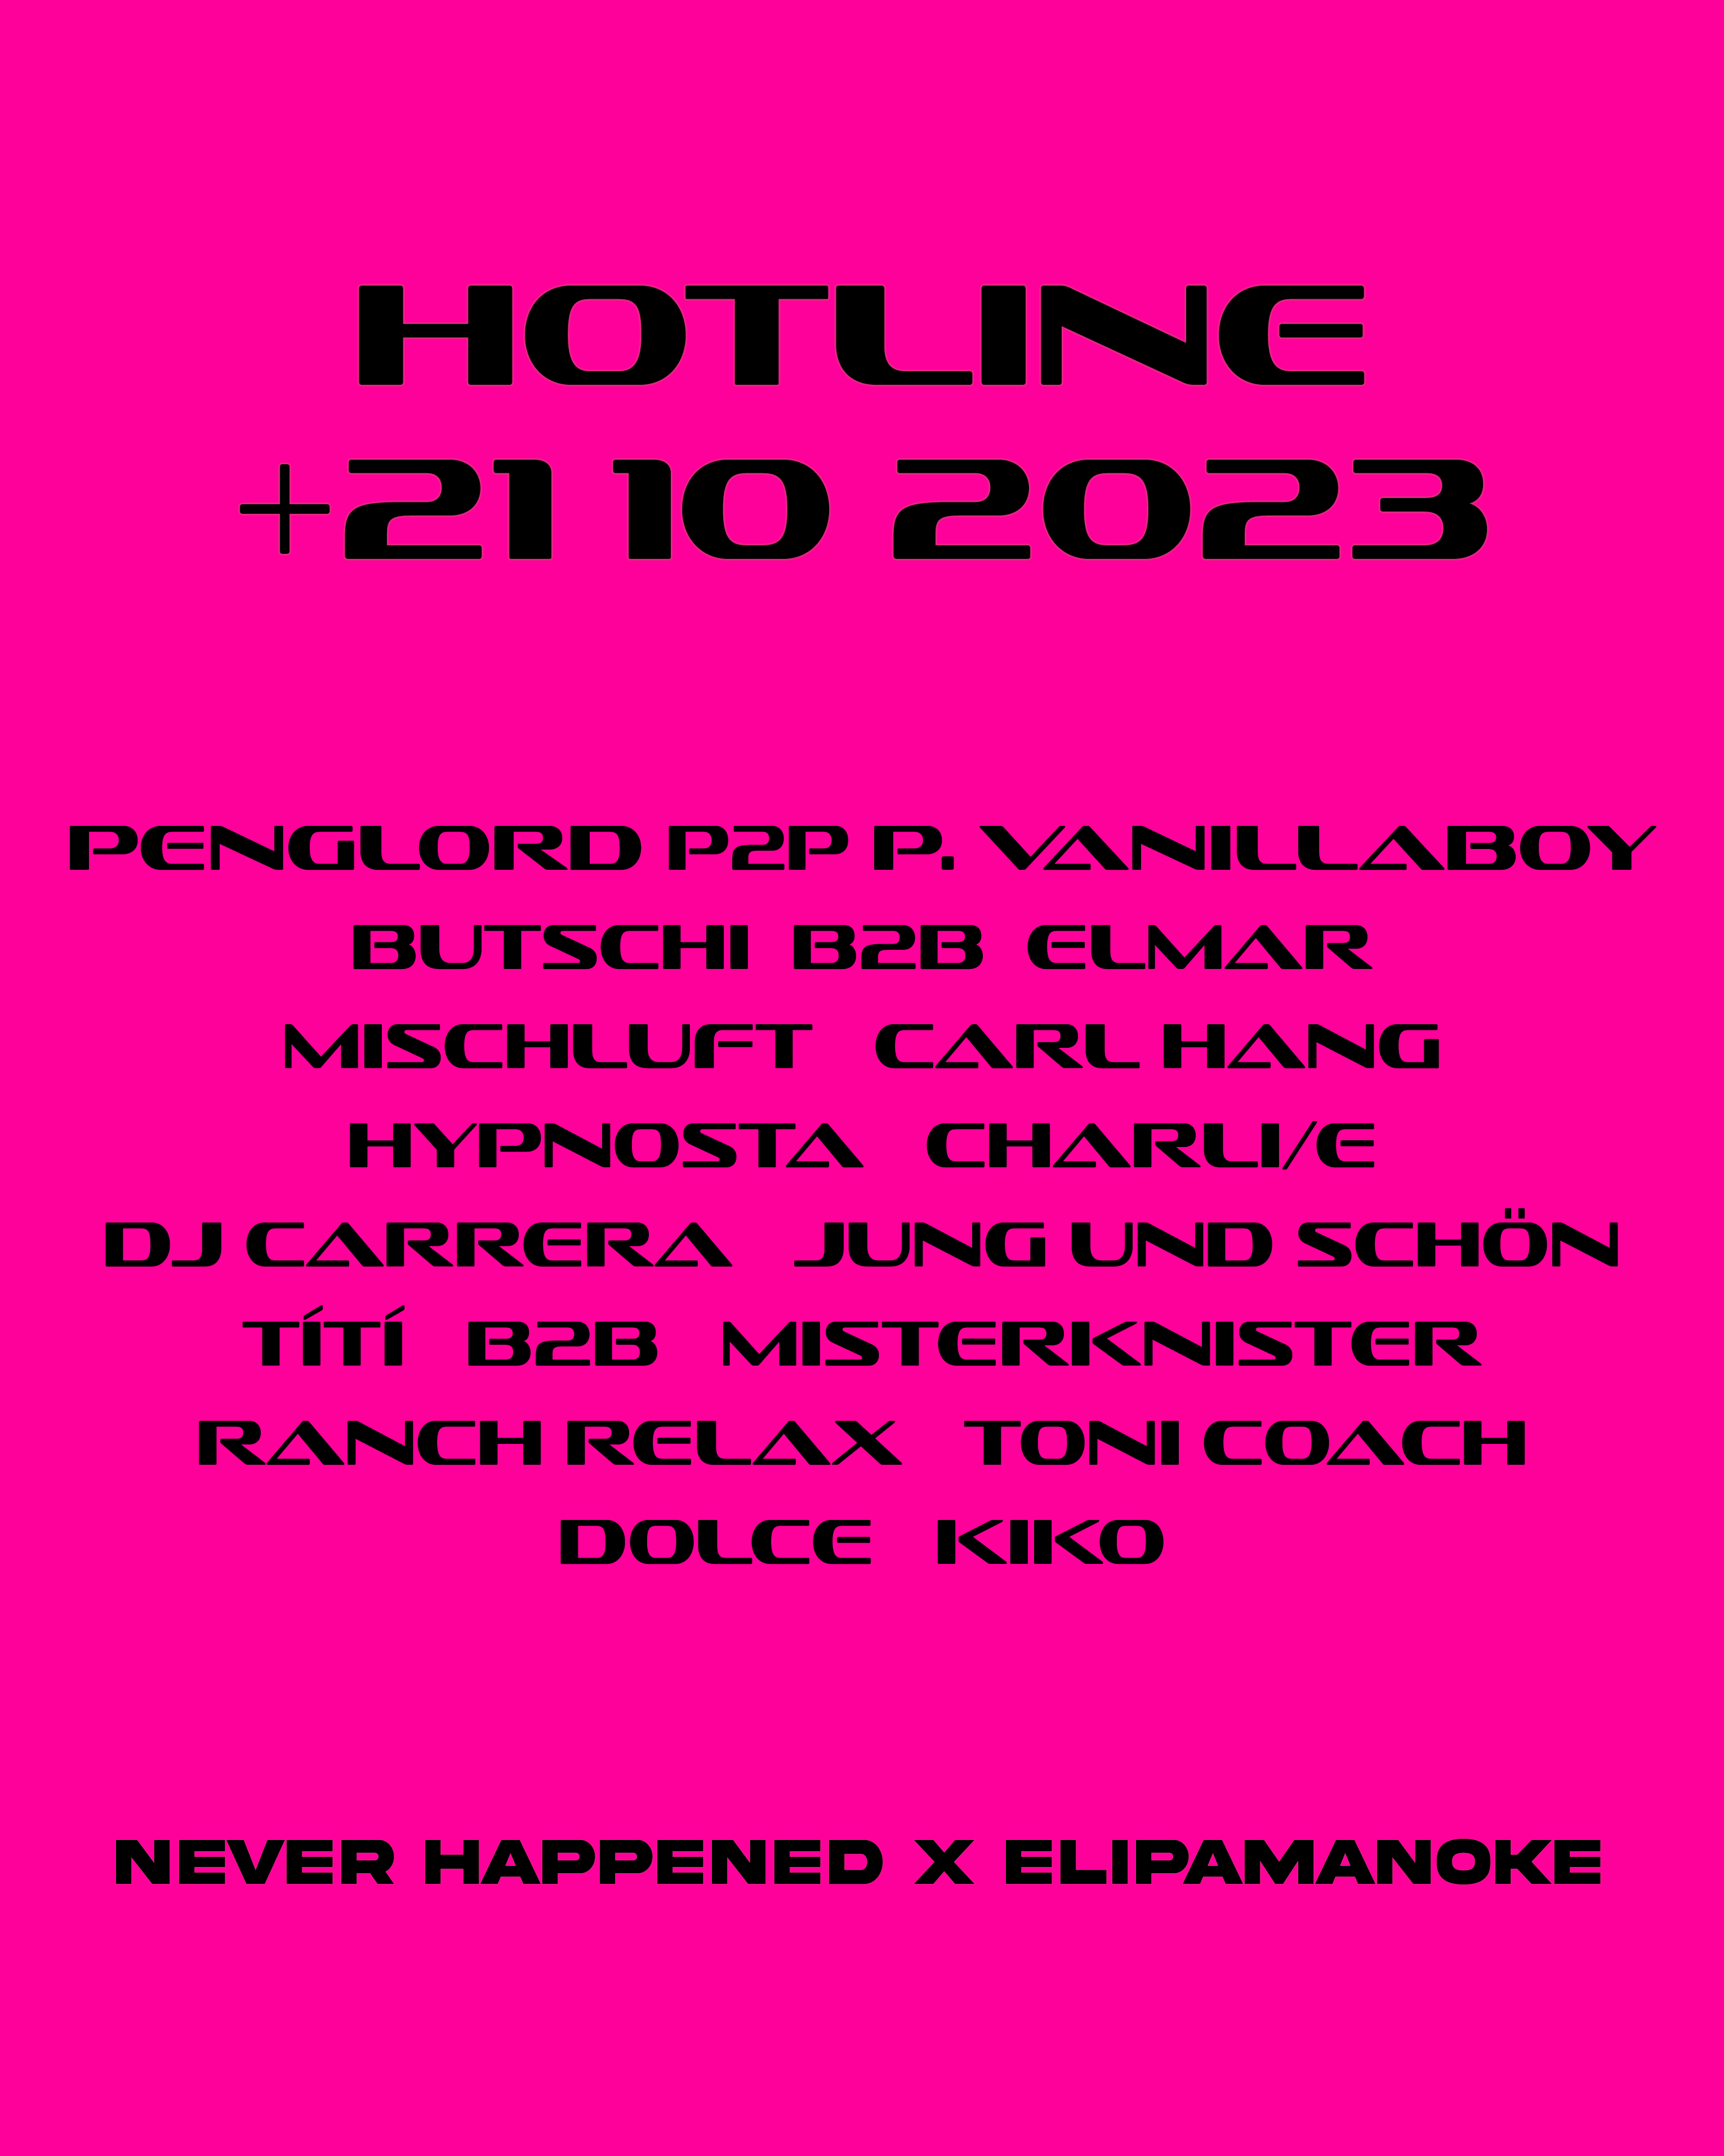 hotline with penglord p2p p.vanillaboy - フライヤー表